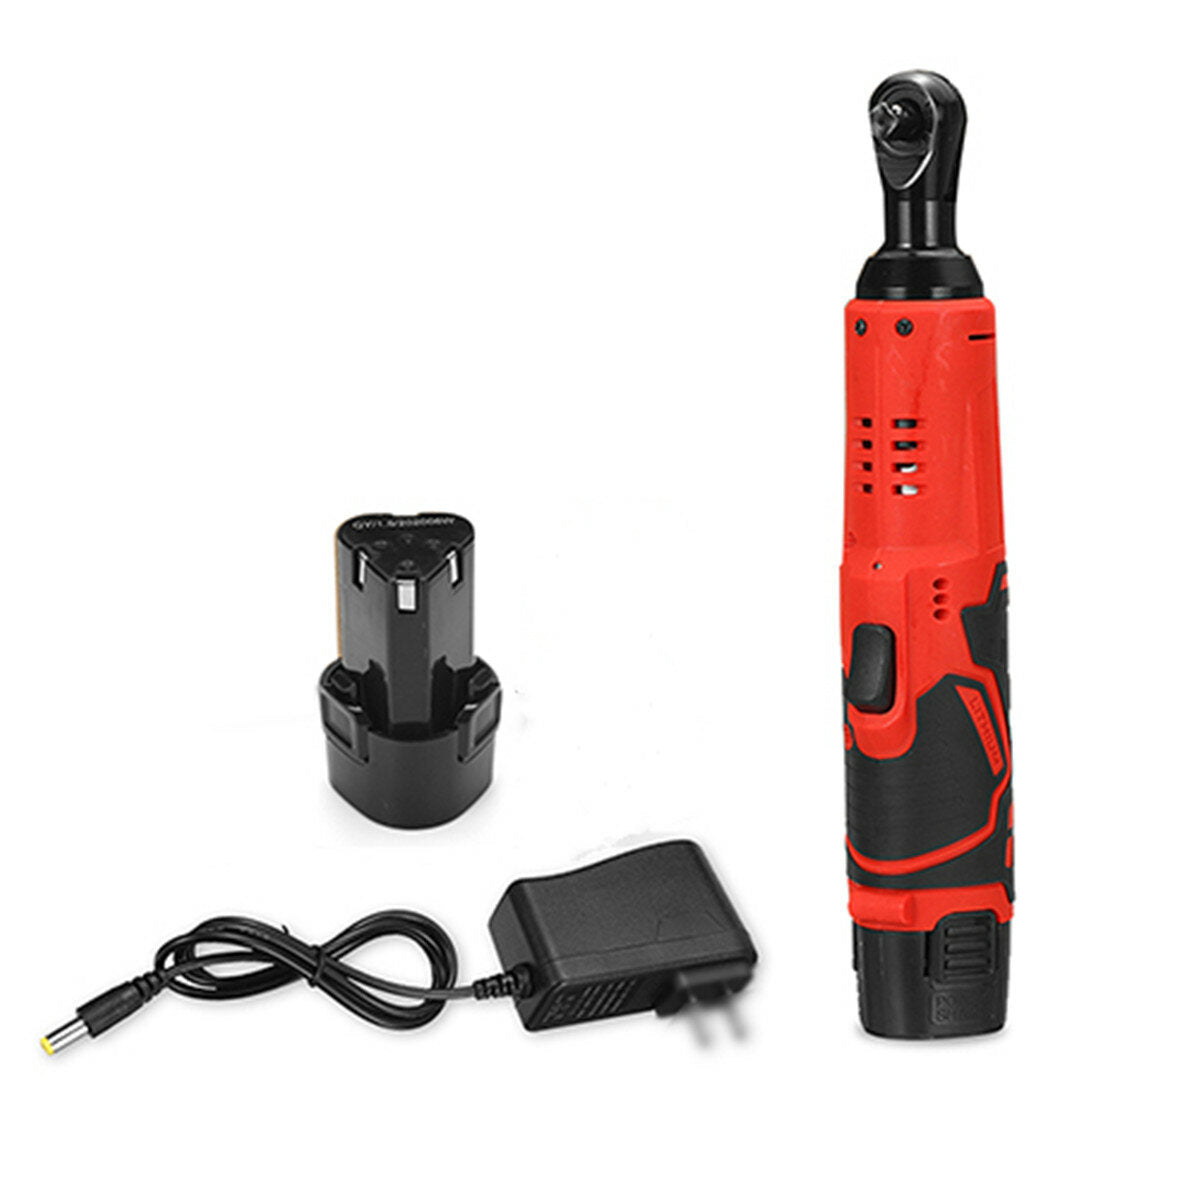 12V 4000mAh 3/8" 65N.m Battery Ratchet Handheld Electric Wrench Set with 1/ 2 Batteries